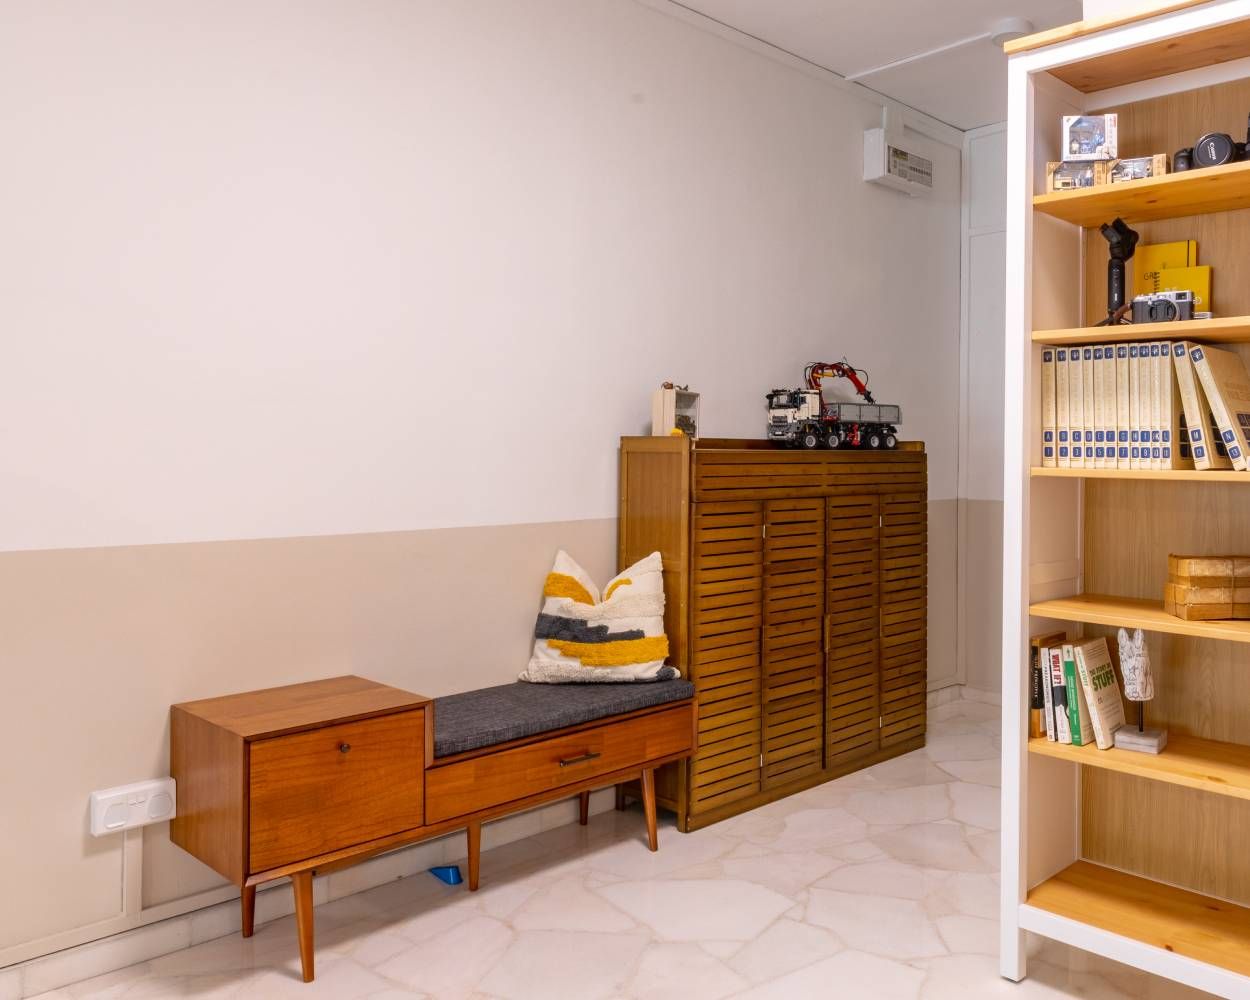 Modern Foyer Design With Wooden Storage Unit And Seater